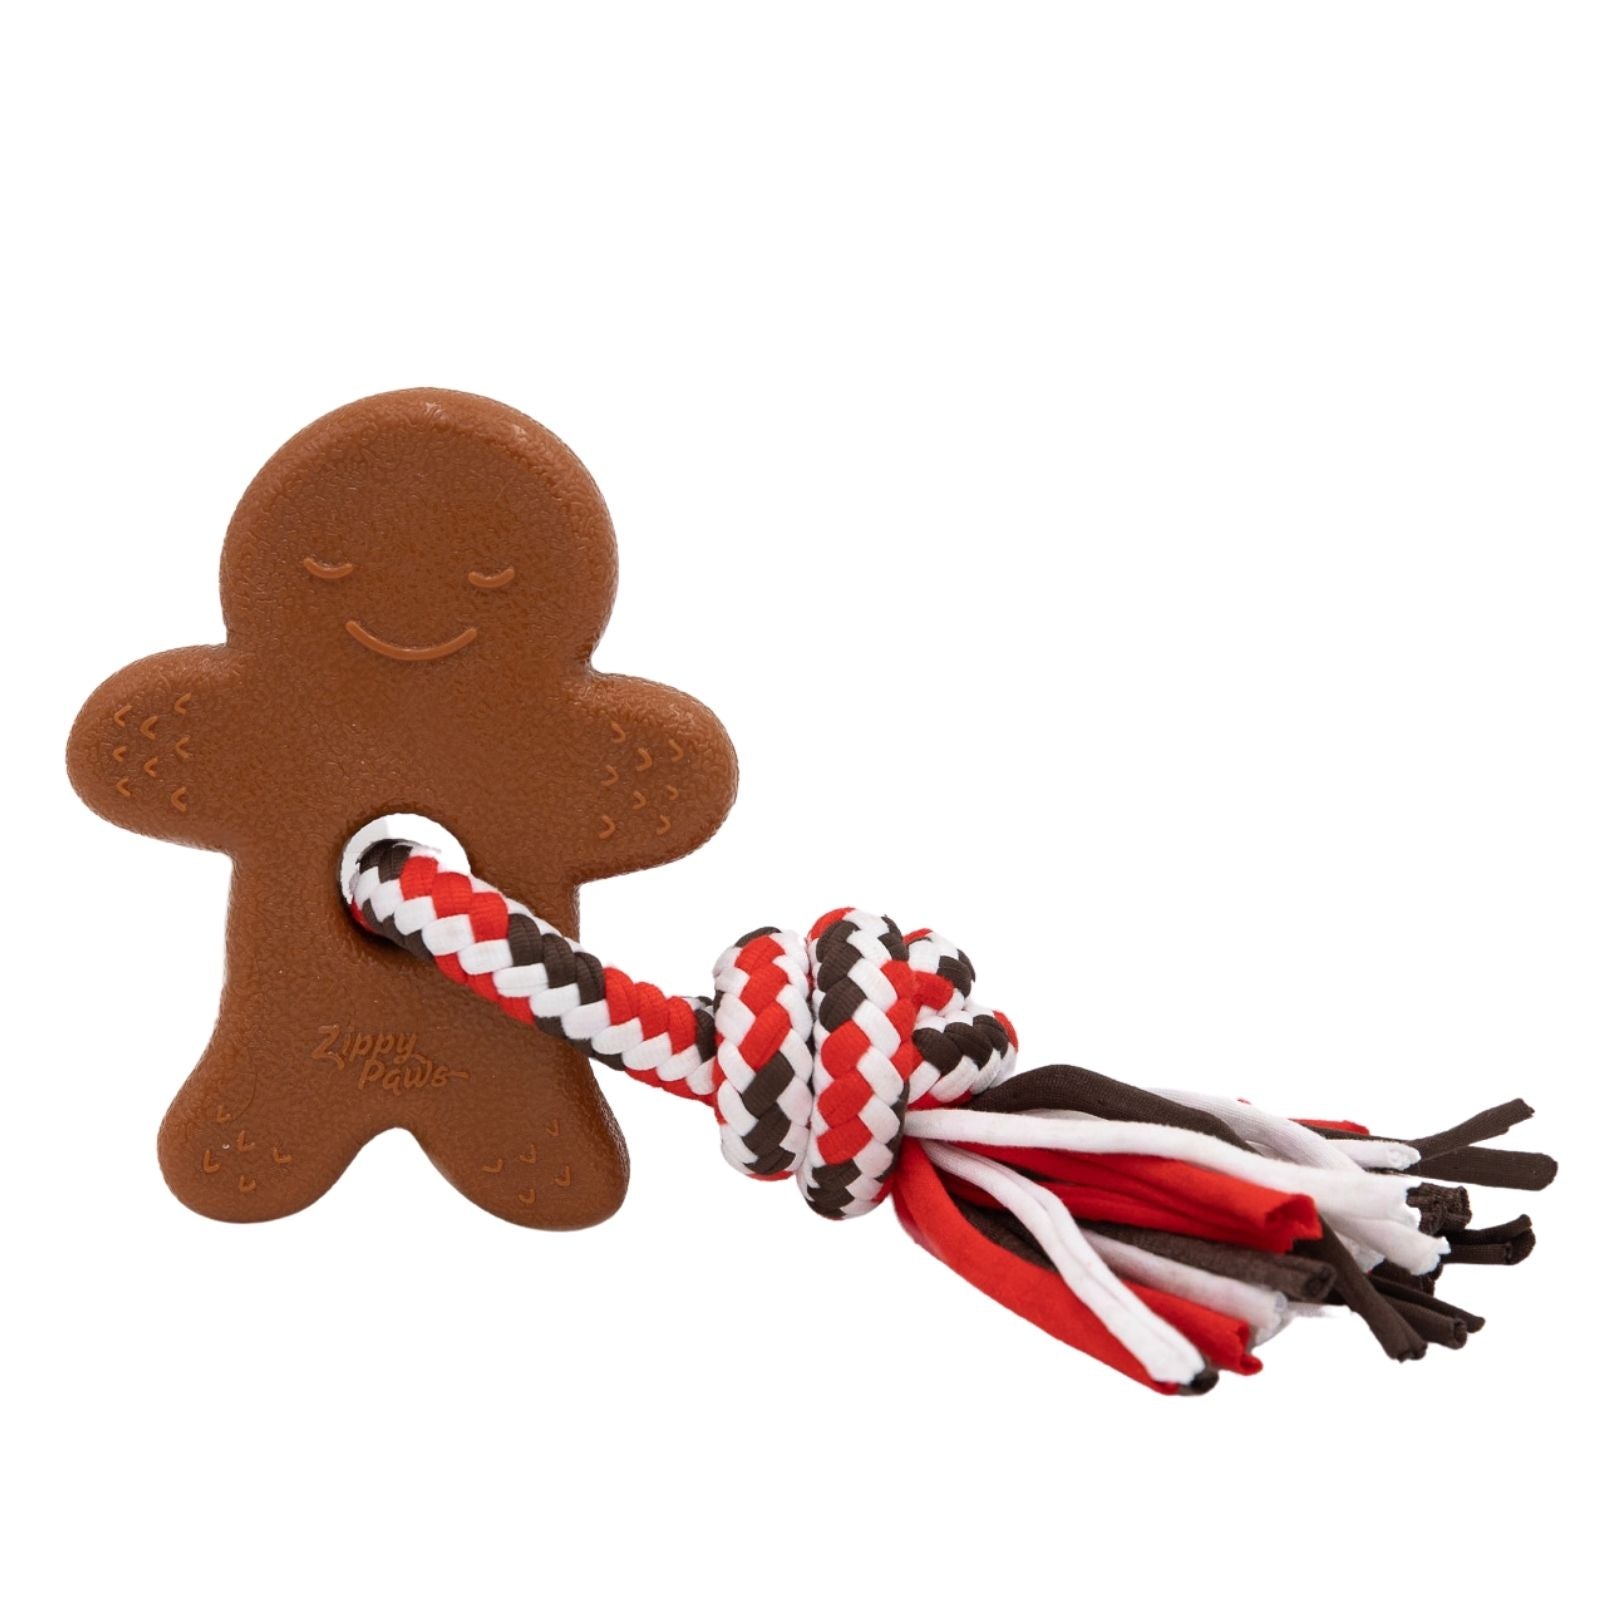 ZippyPaws Holiday ZippyTuff Teetherz  Gingerbread Man  |  Durable TPR Teething Toy for Puppies